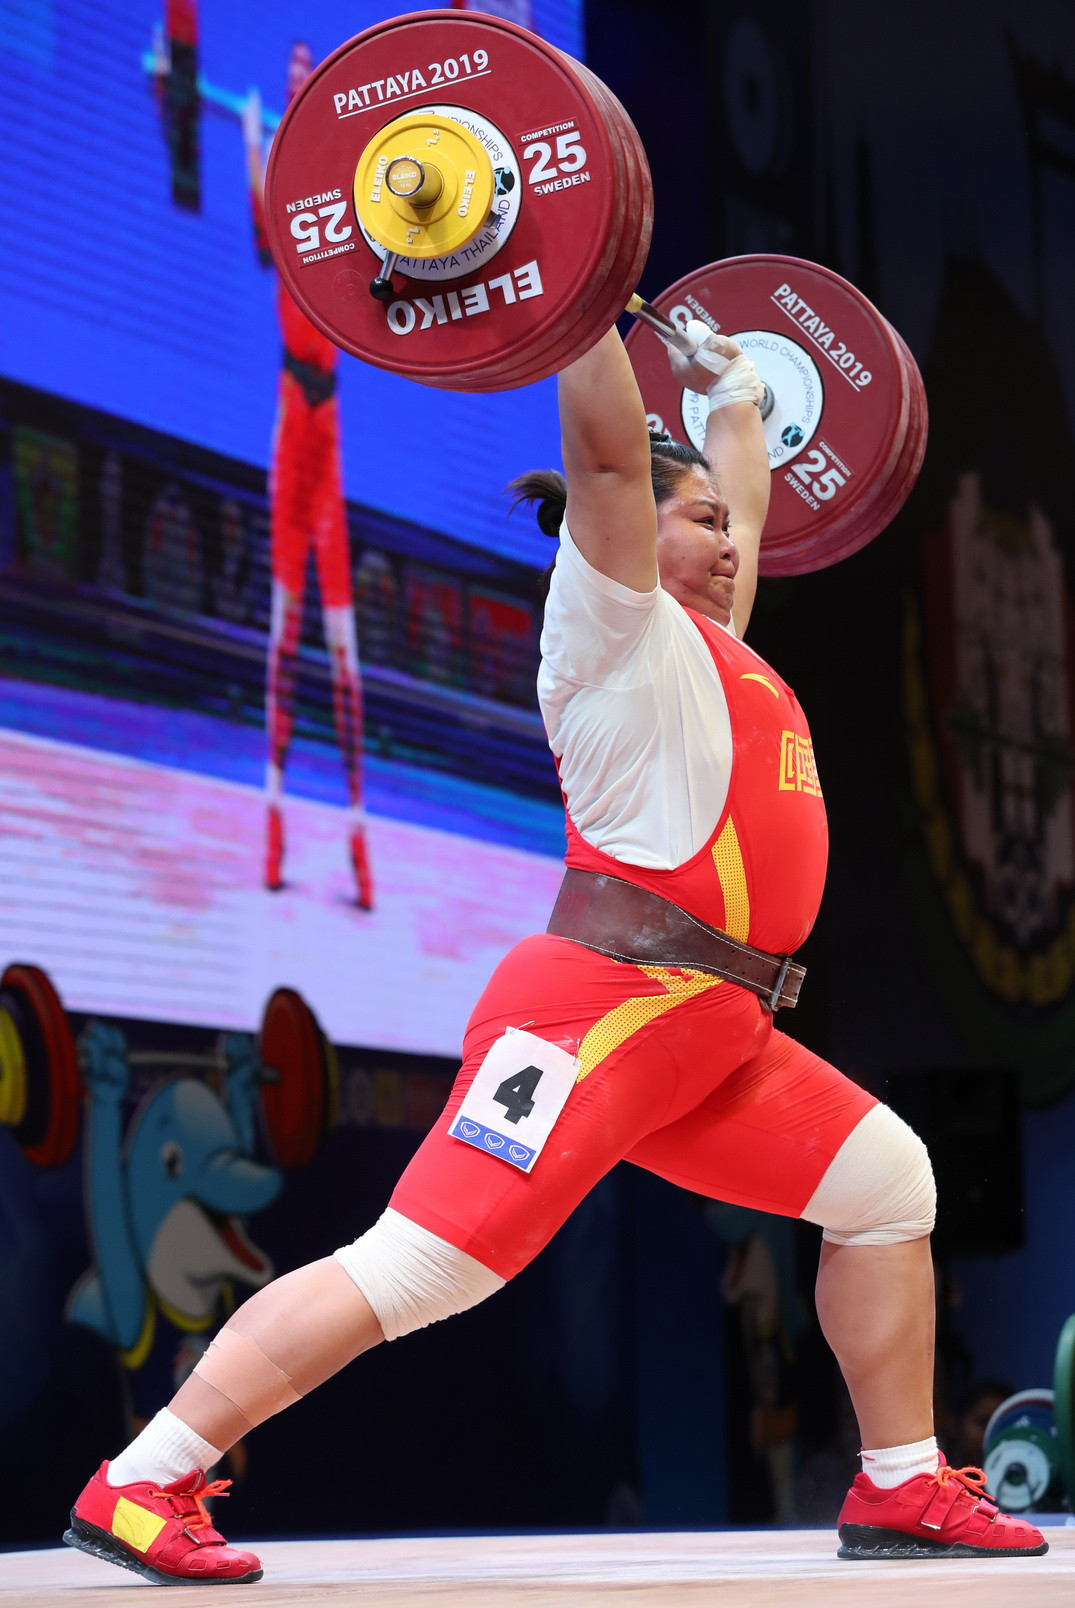 The overall bronze medallist was Rio 2016 Olympic champion Meng Suping of China ©IWF